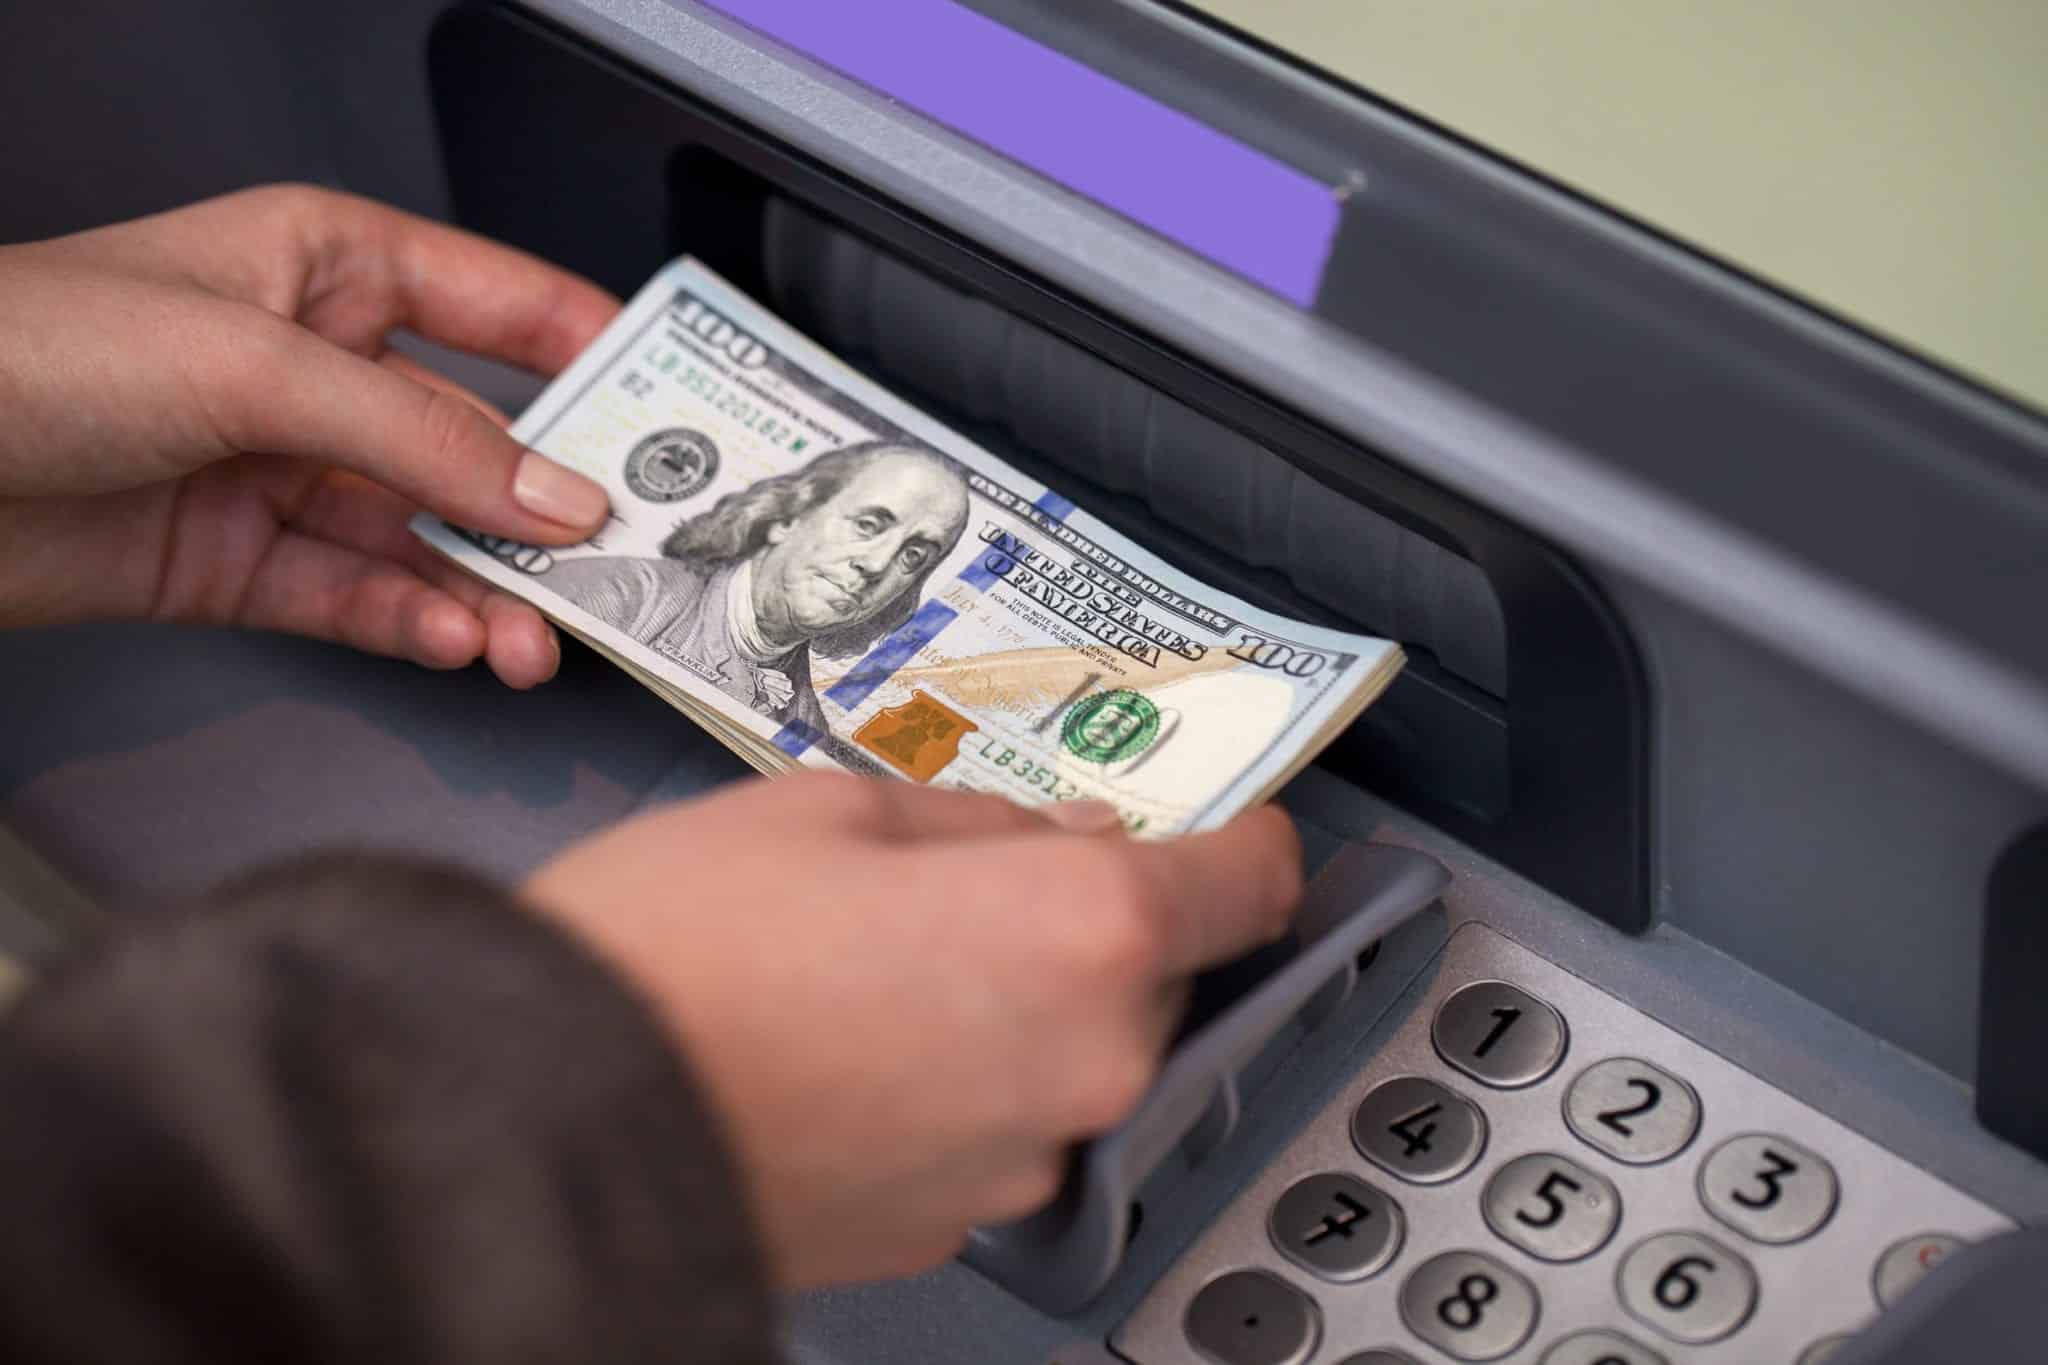 What Kind of Charges Would Follow a Massive ATM Hack?